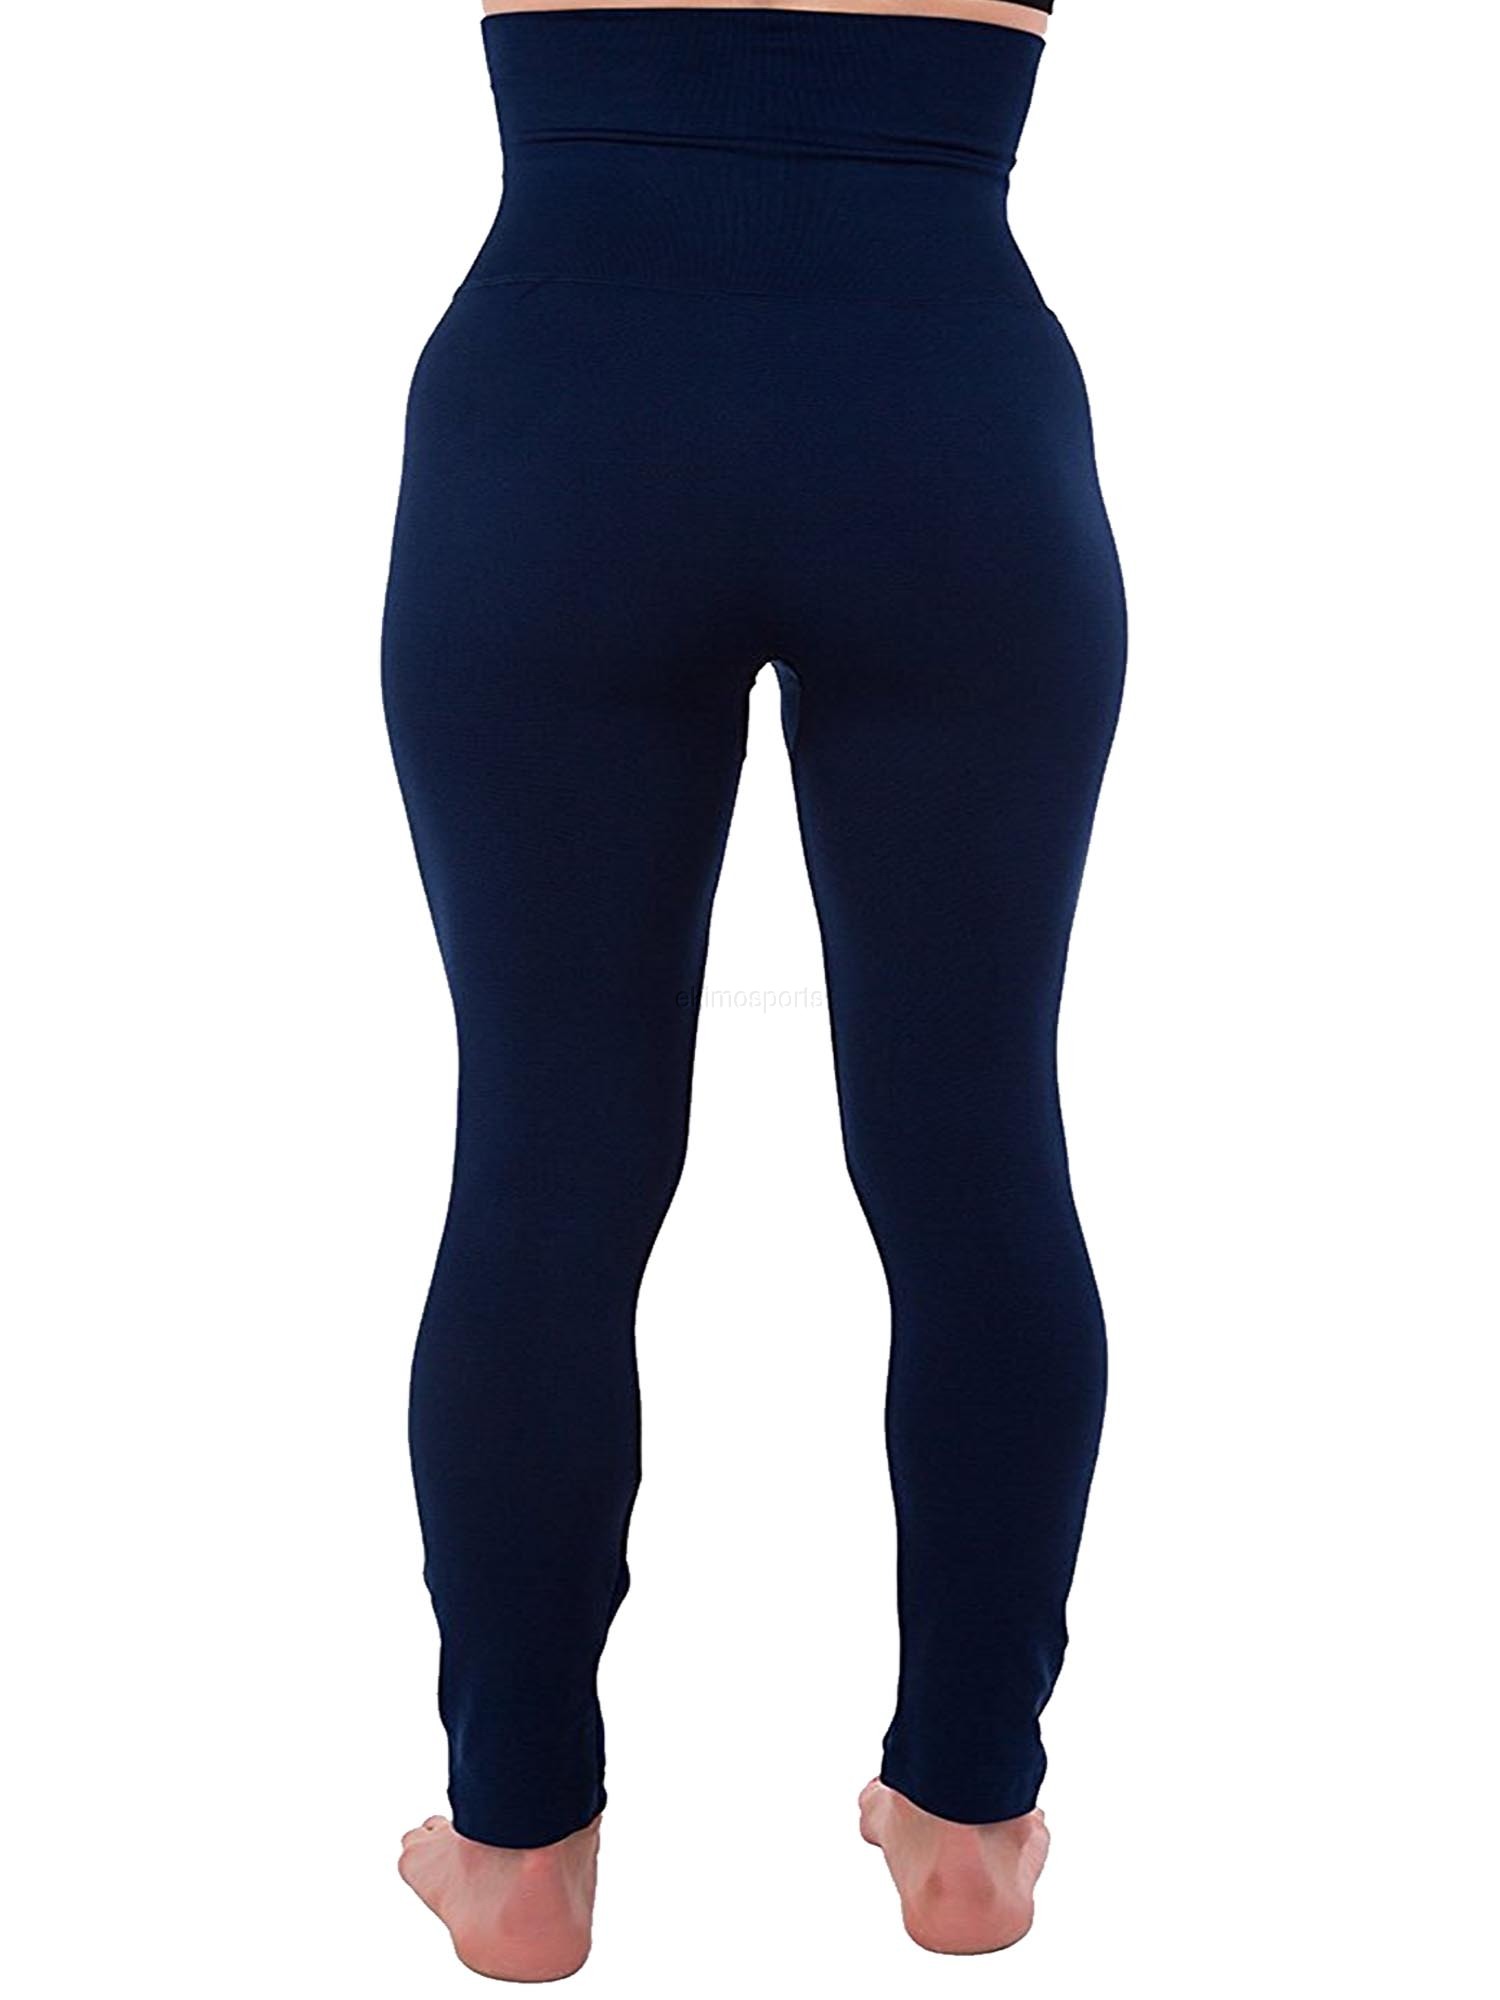 High Waist Tummy Control Full Length Legging Compression Top Pants Fleece Lined Plus Size XL 2XL - image 4 of 4